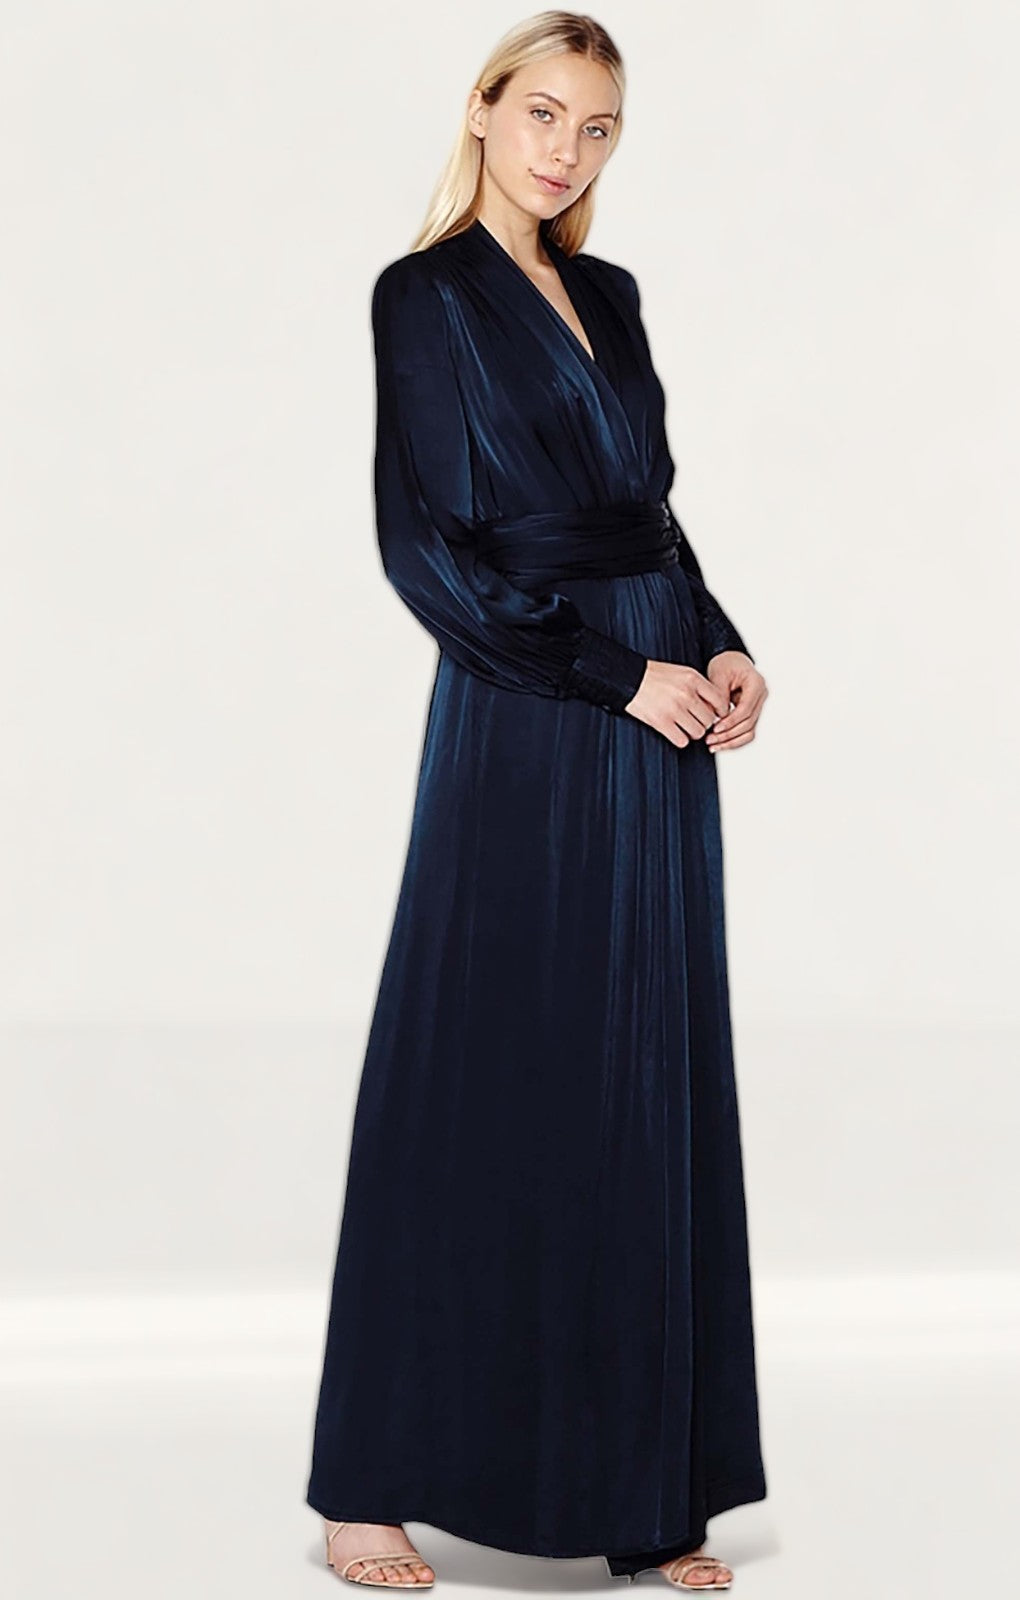 Ghost Navy Becky Maxi Dress product image